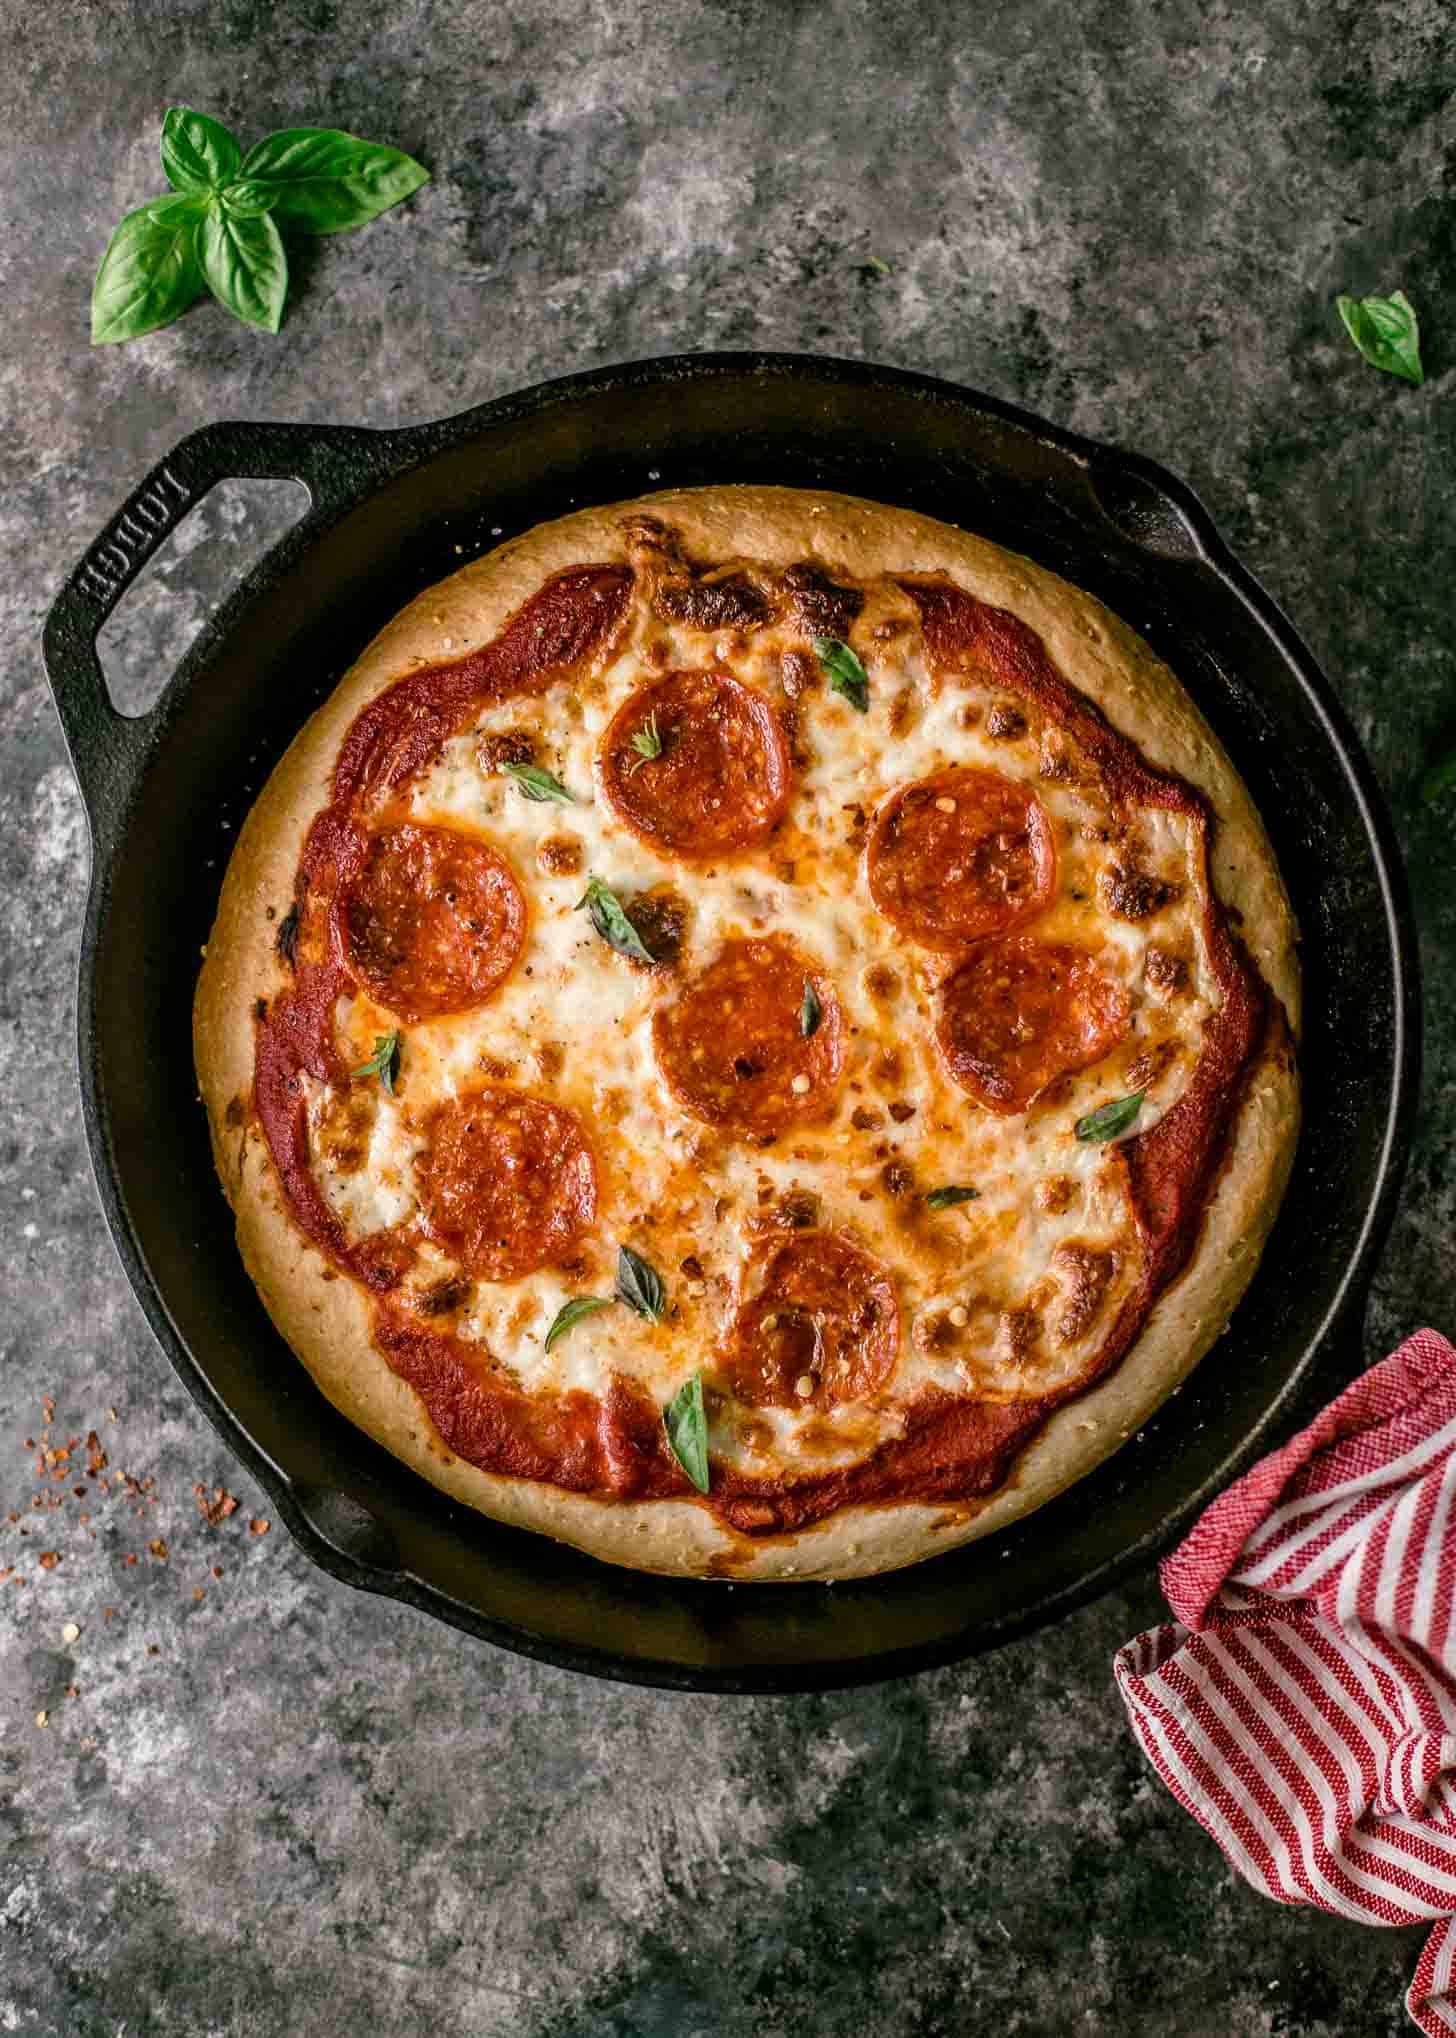 Deep Dish Pizza in a cast iron skillet